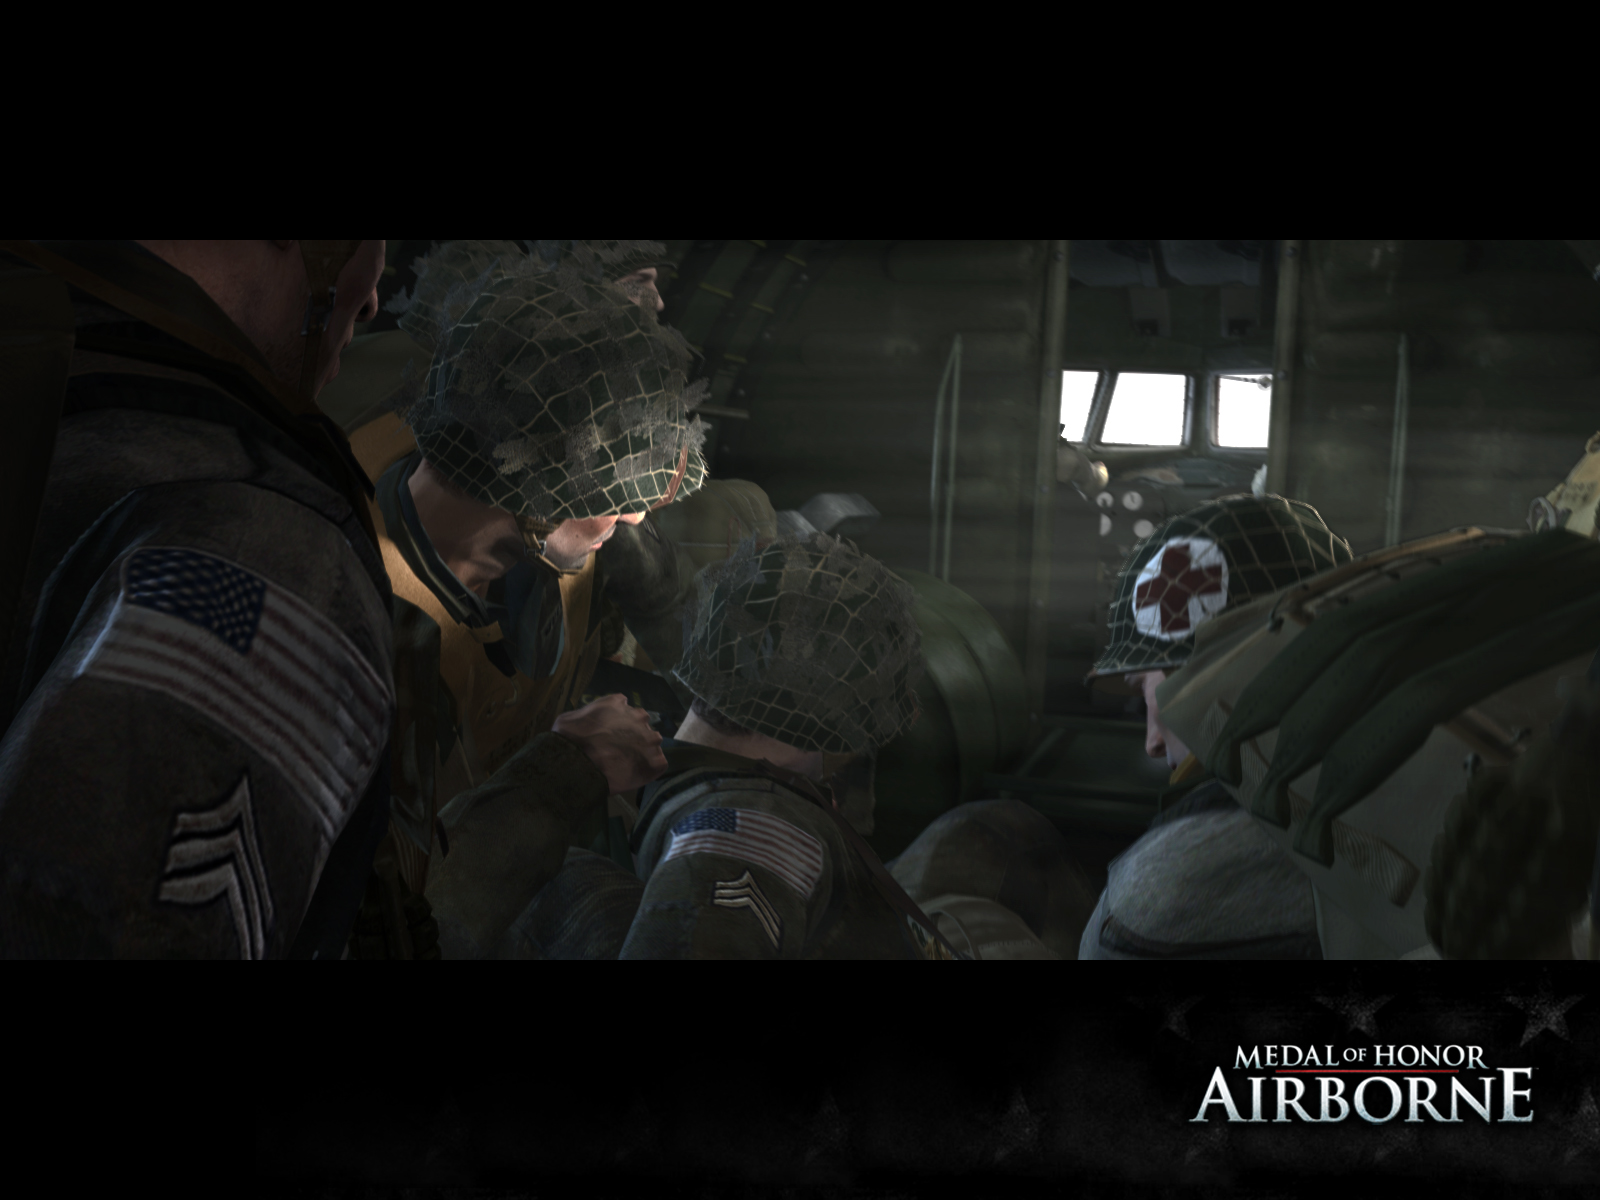 Medal of Honor: Airborne (2007) promotional art